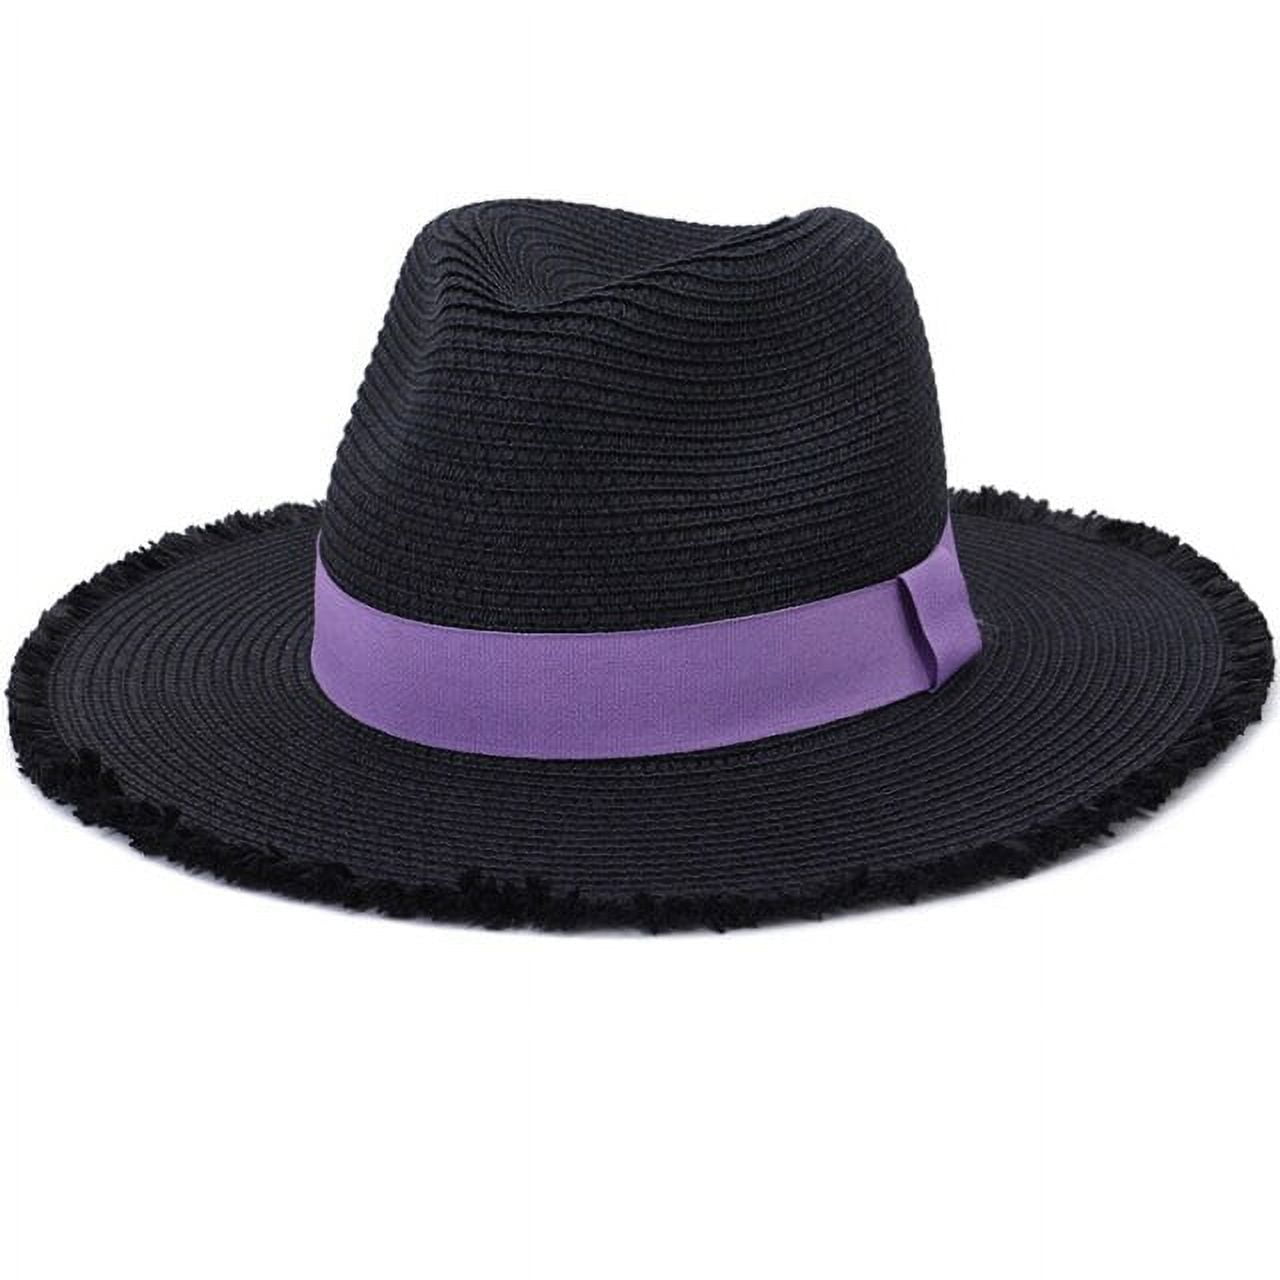 Buy Colorful Unisex Summer Trilby Hat: Stylish Sun Protection for